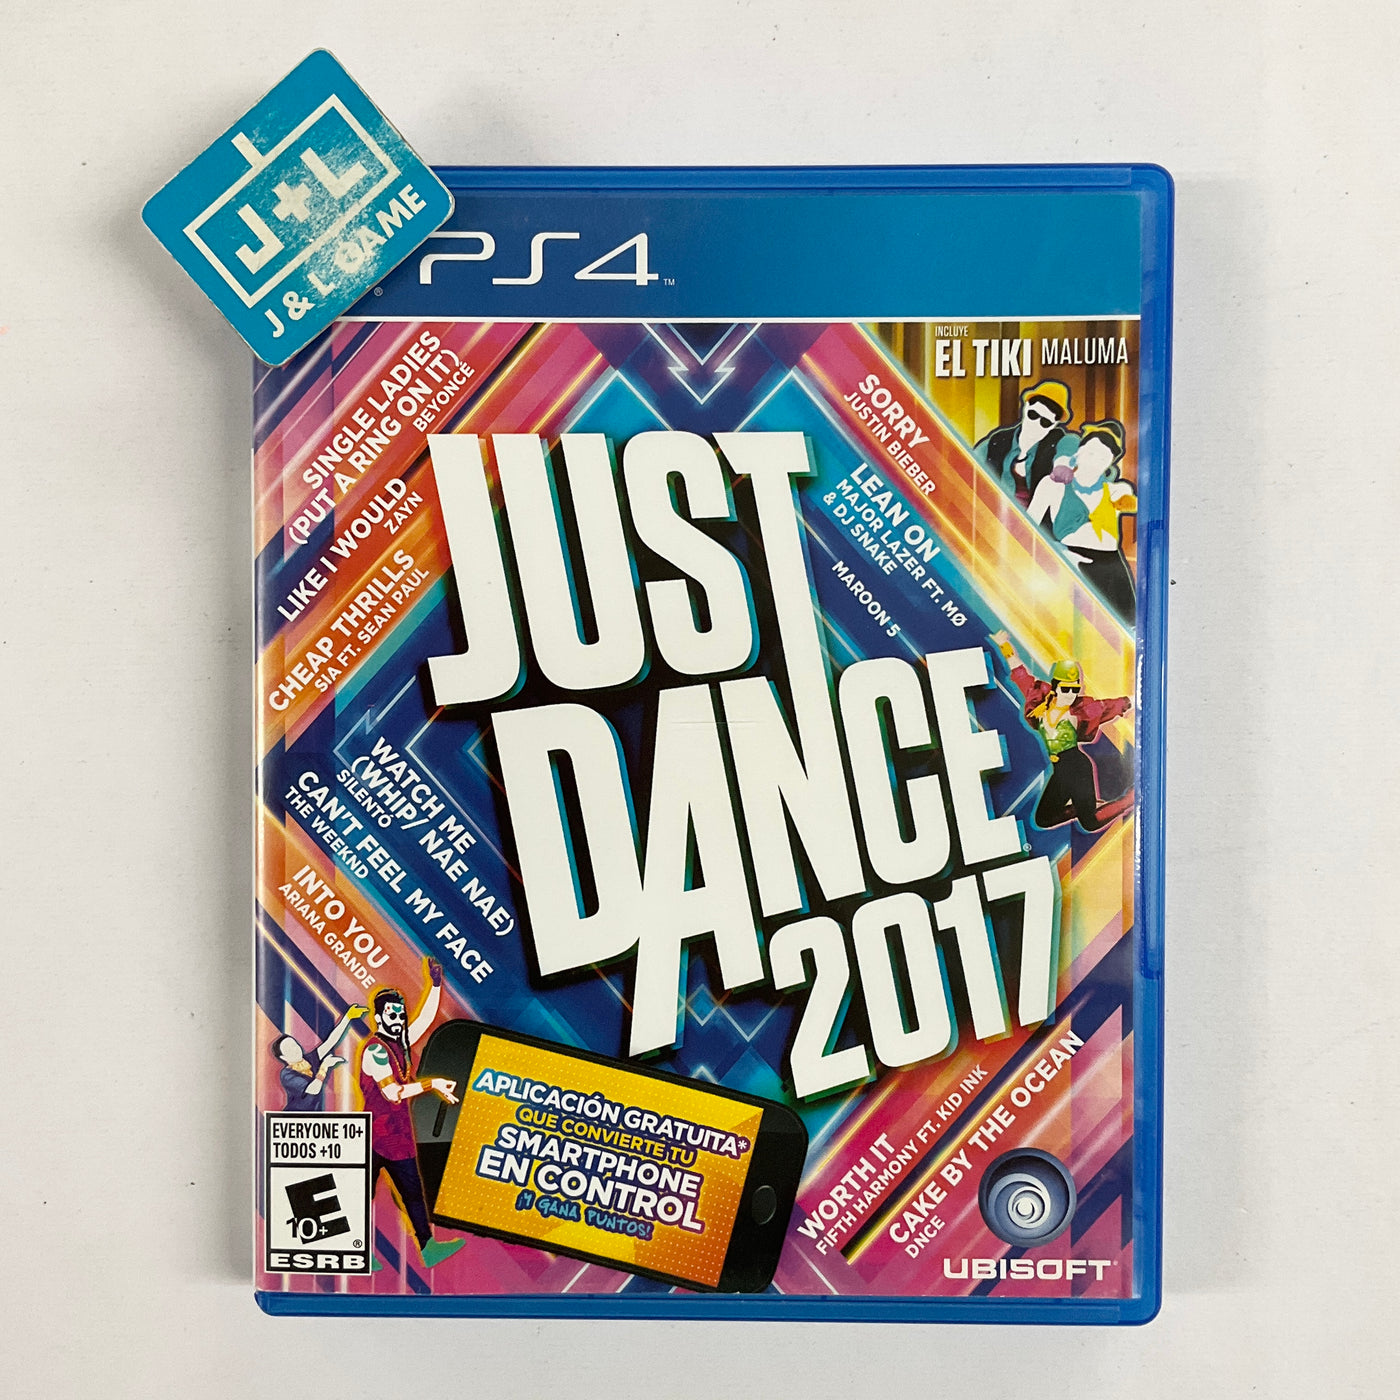 New Ubisoft Video Game Just Dance 2017 PS4